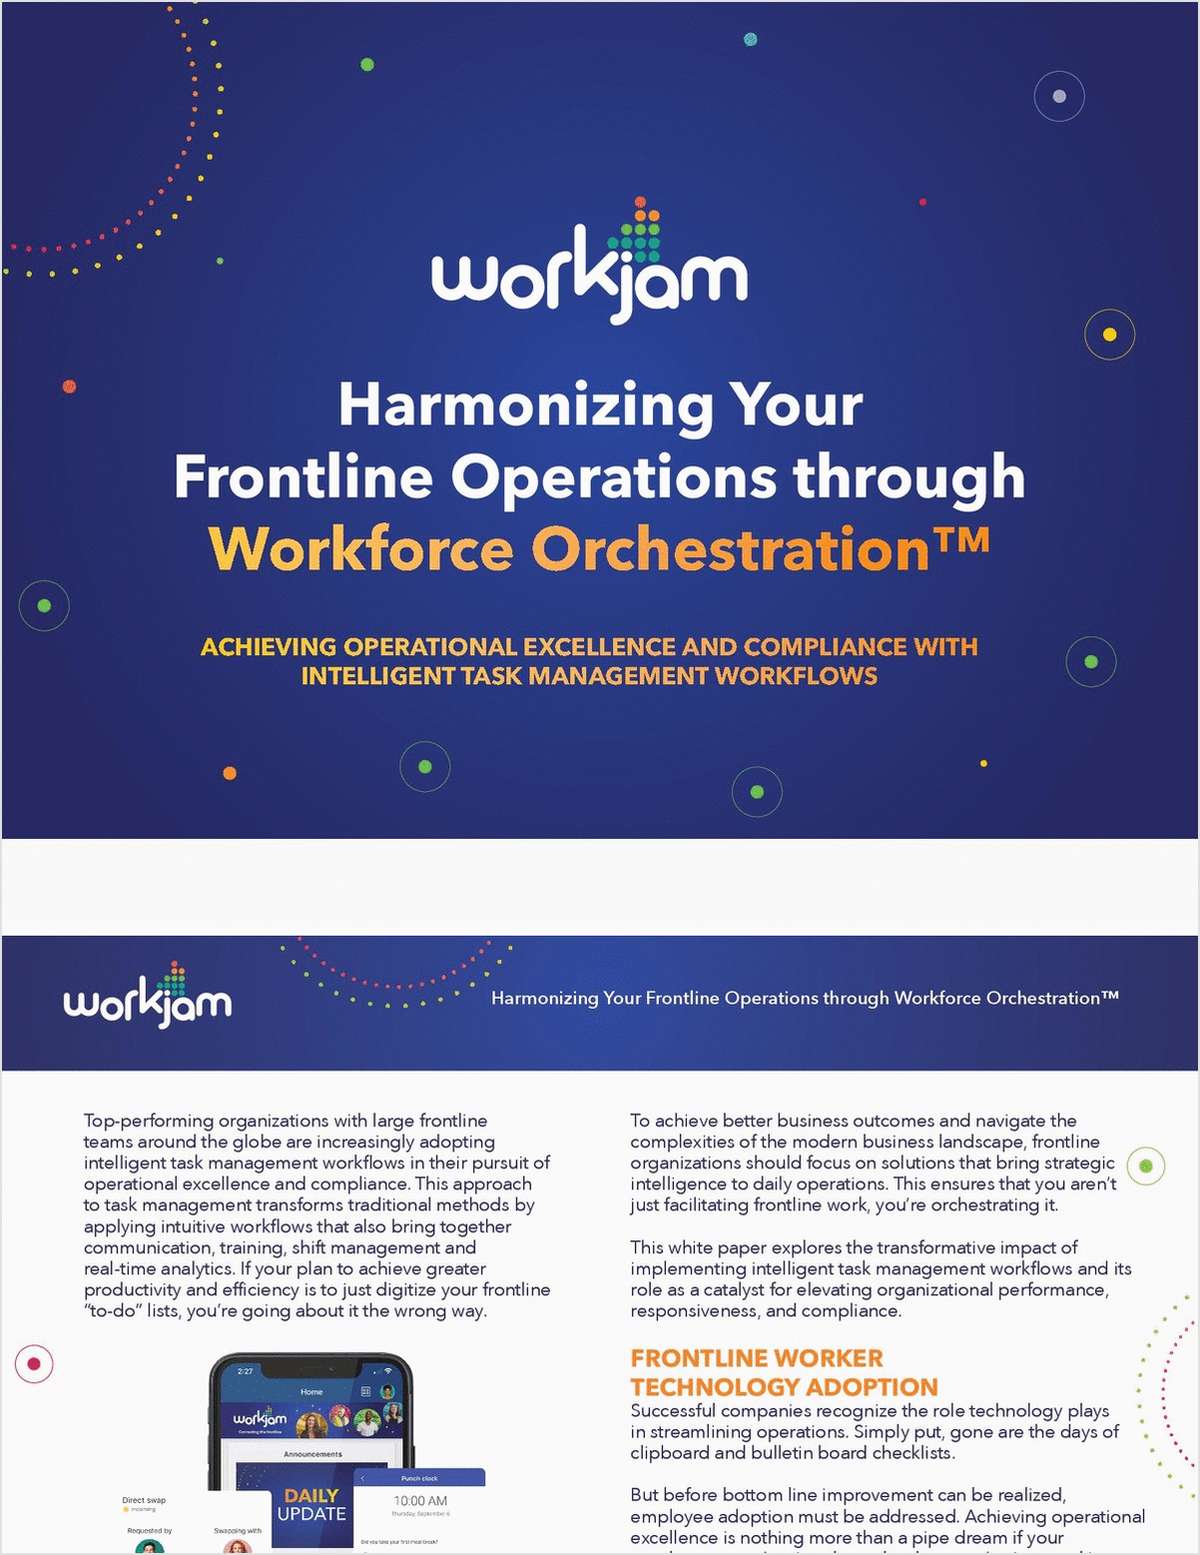 Harmonizing Your Frontline Operations through Workforce Orchestration™